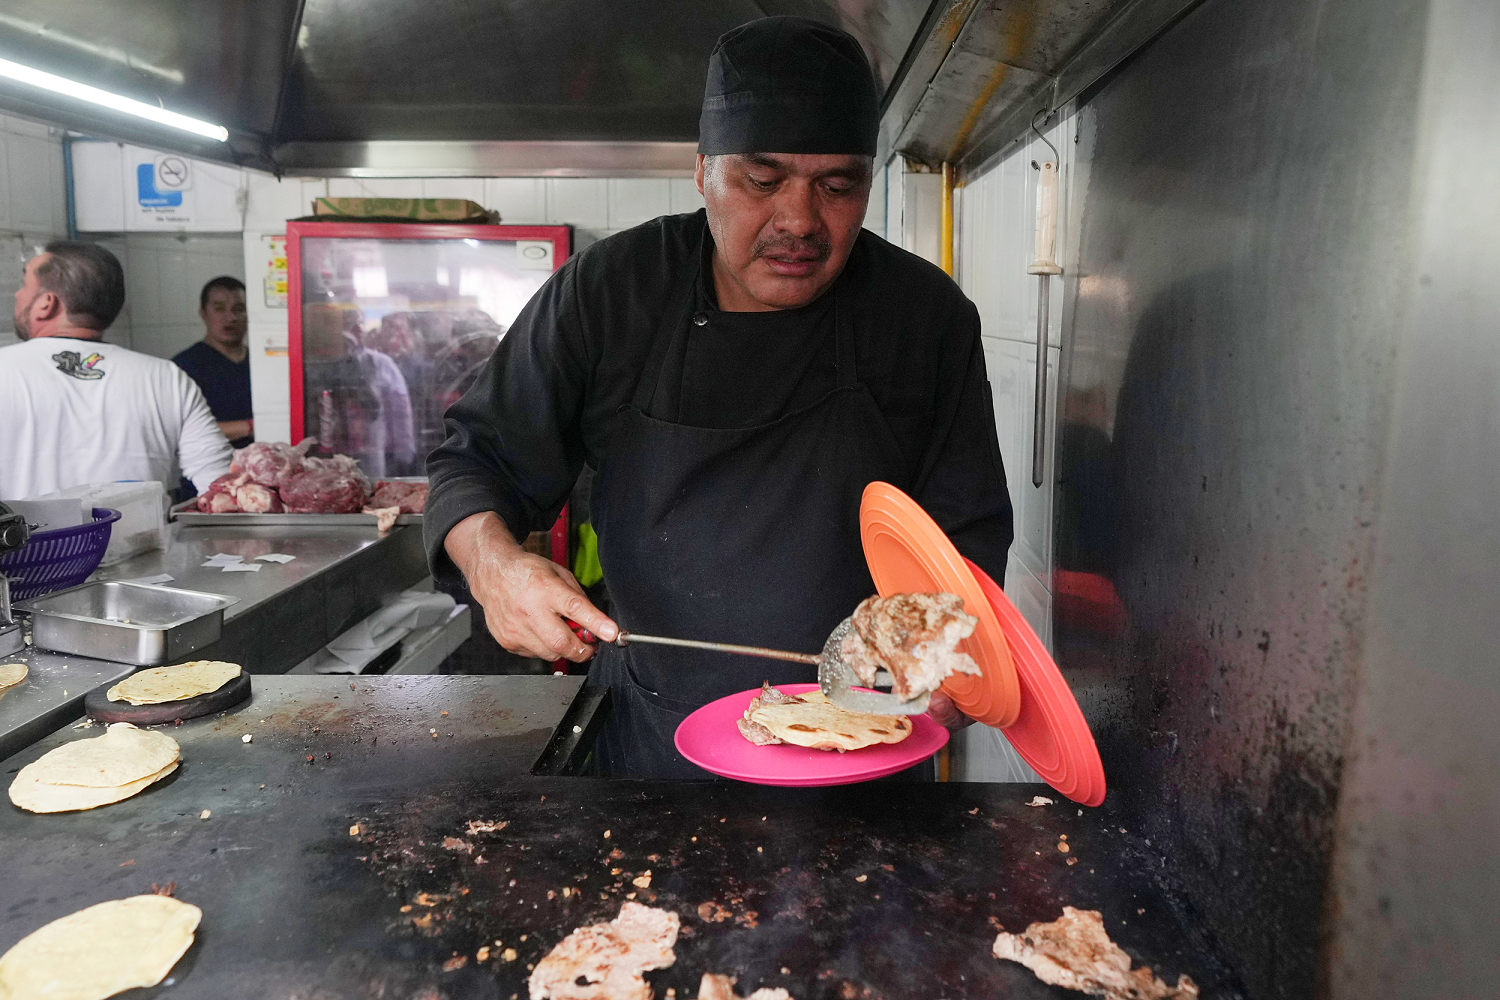 First Mexican taco stand with a Michelin star says 'simplicity' is the secret to success